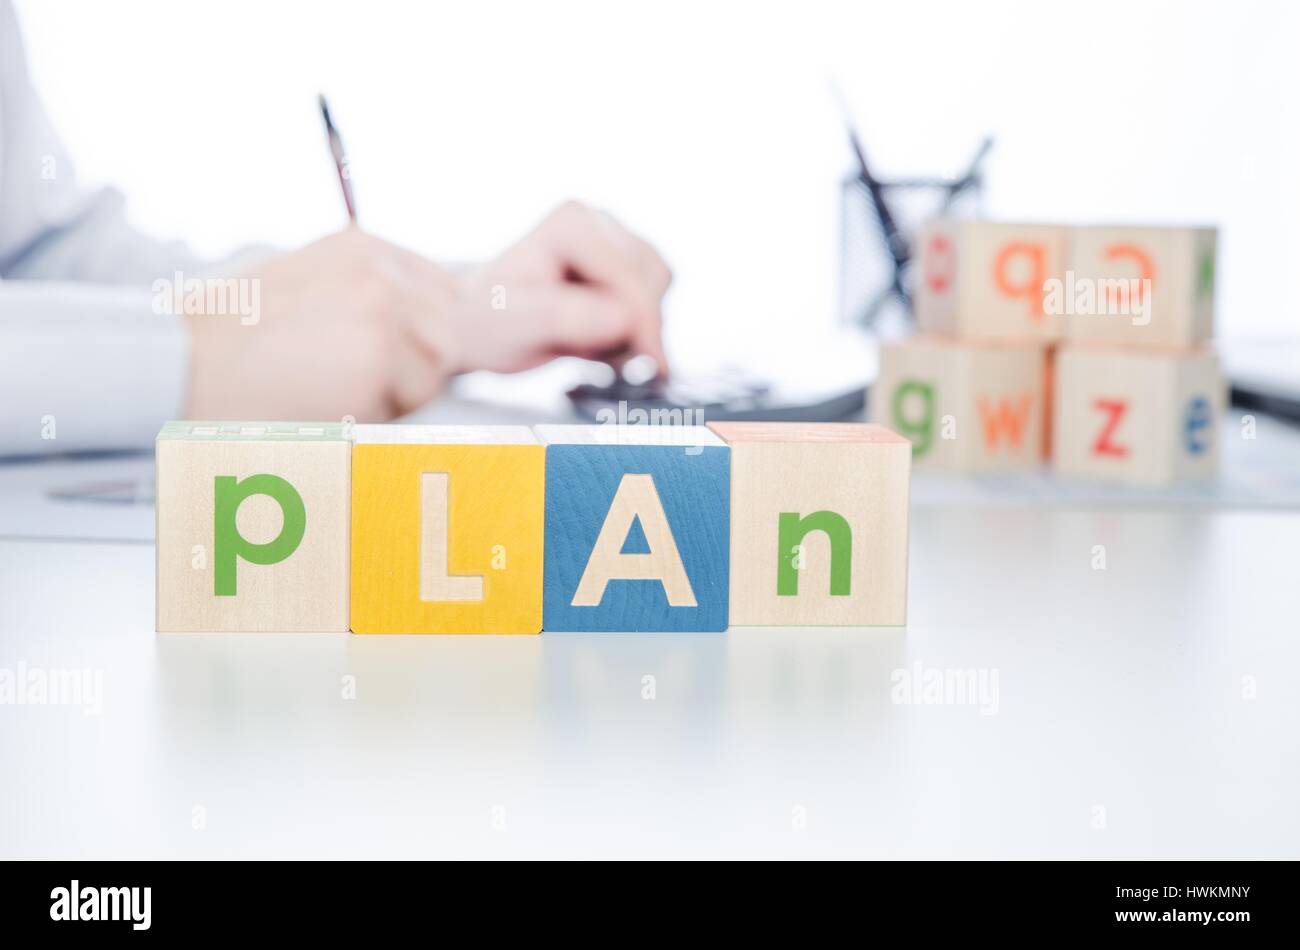 PLAN word with colorful blocks. plan work background pen hand business assemble businessman concept Stock Photo